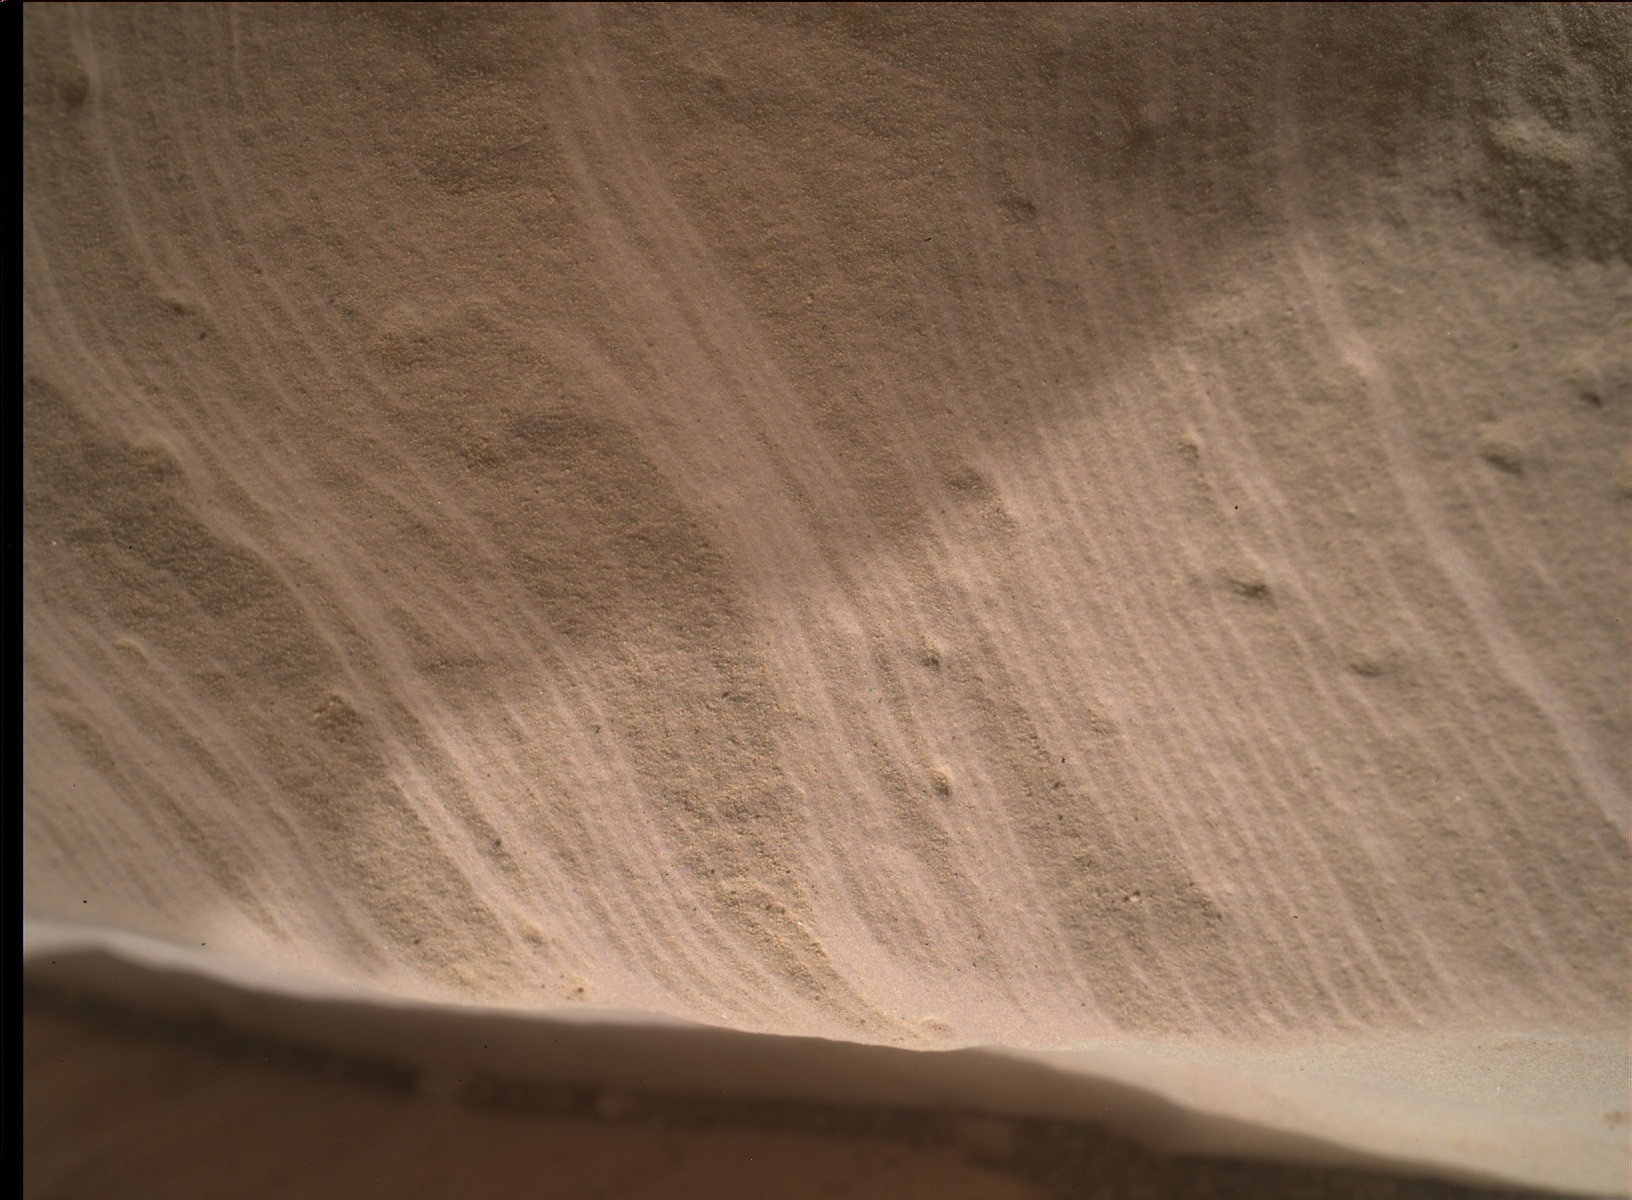 Nasa's Mars rover Curiosity acquired this image using its Mars Hand Lens Imager (MAHLI) on Sol 1816